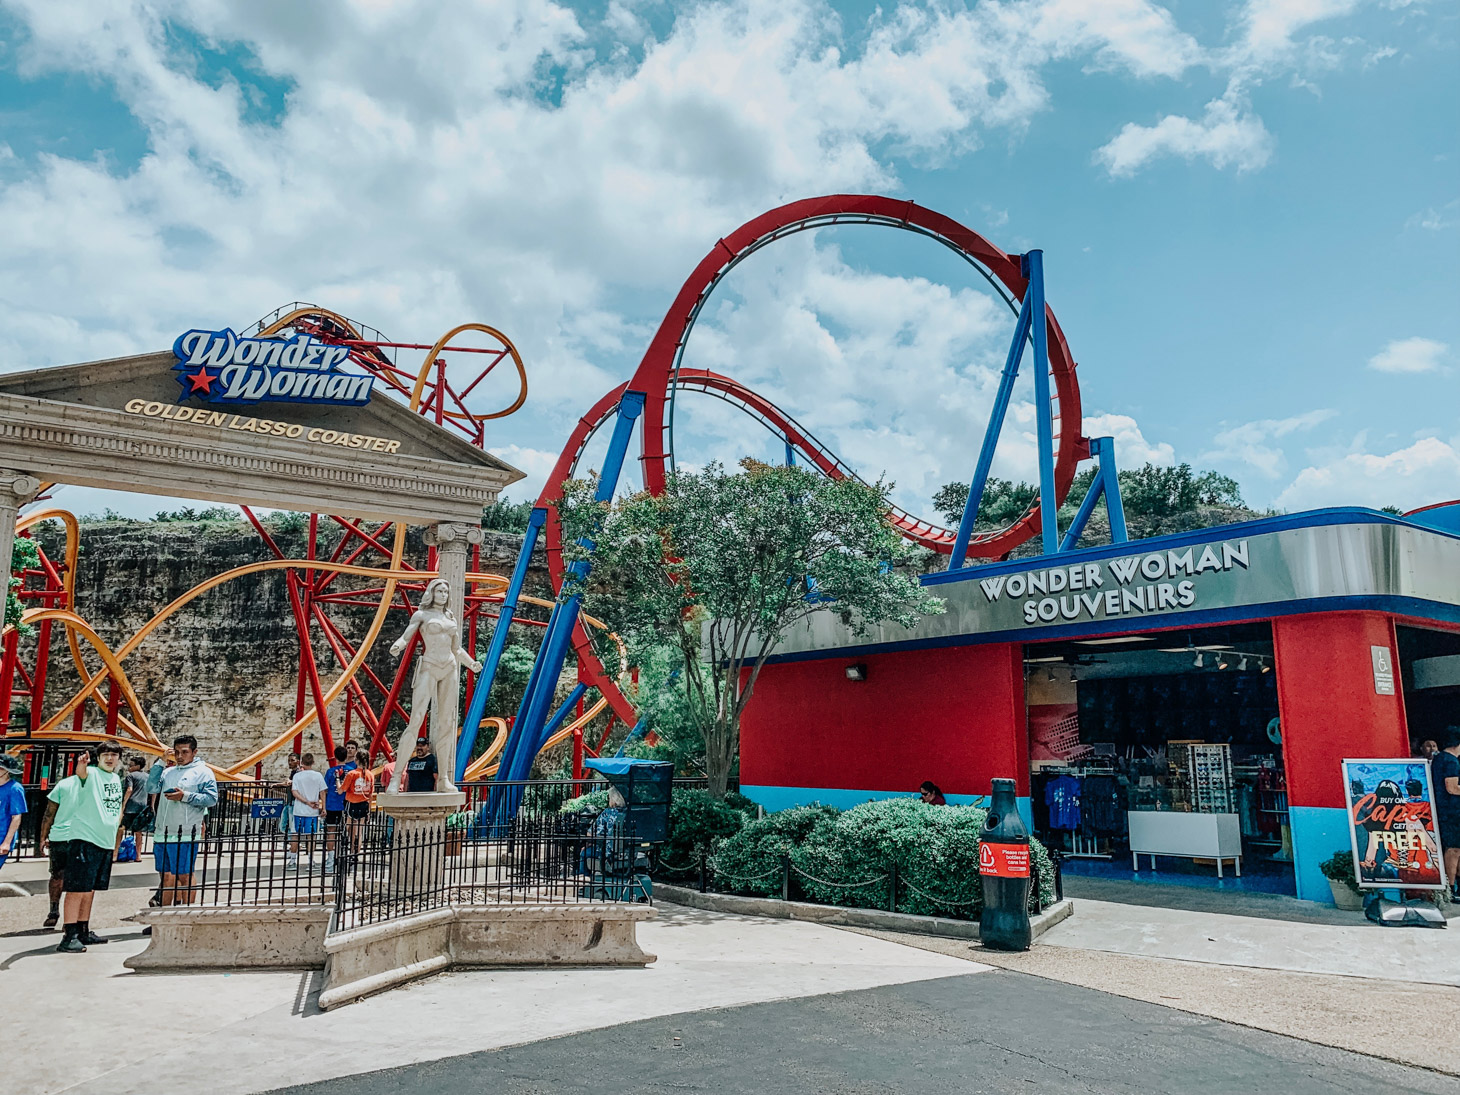 Tips to visit 6 flags fiesta Texas with a toddler, featured by top US travel blog, Lone Star Looking Glass